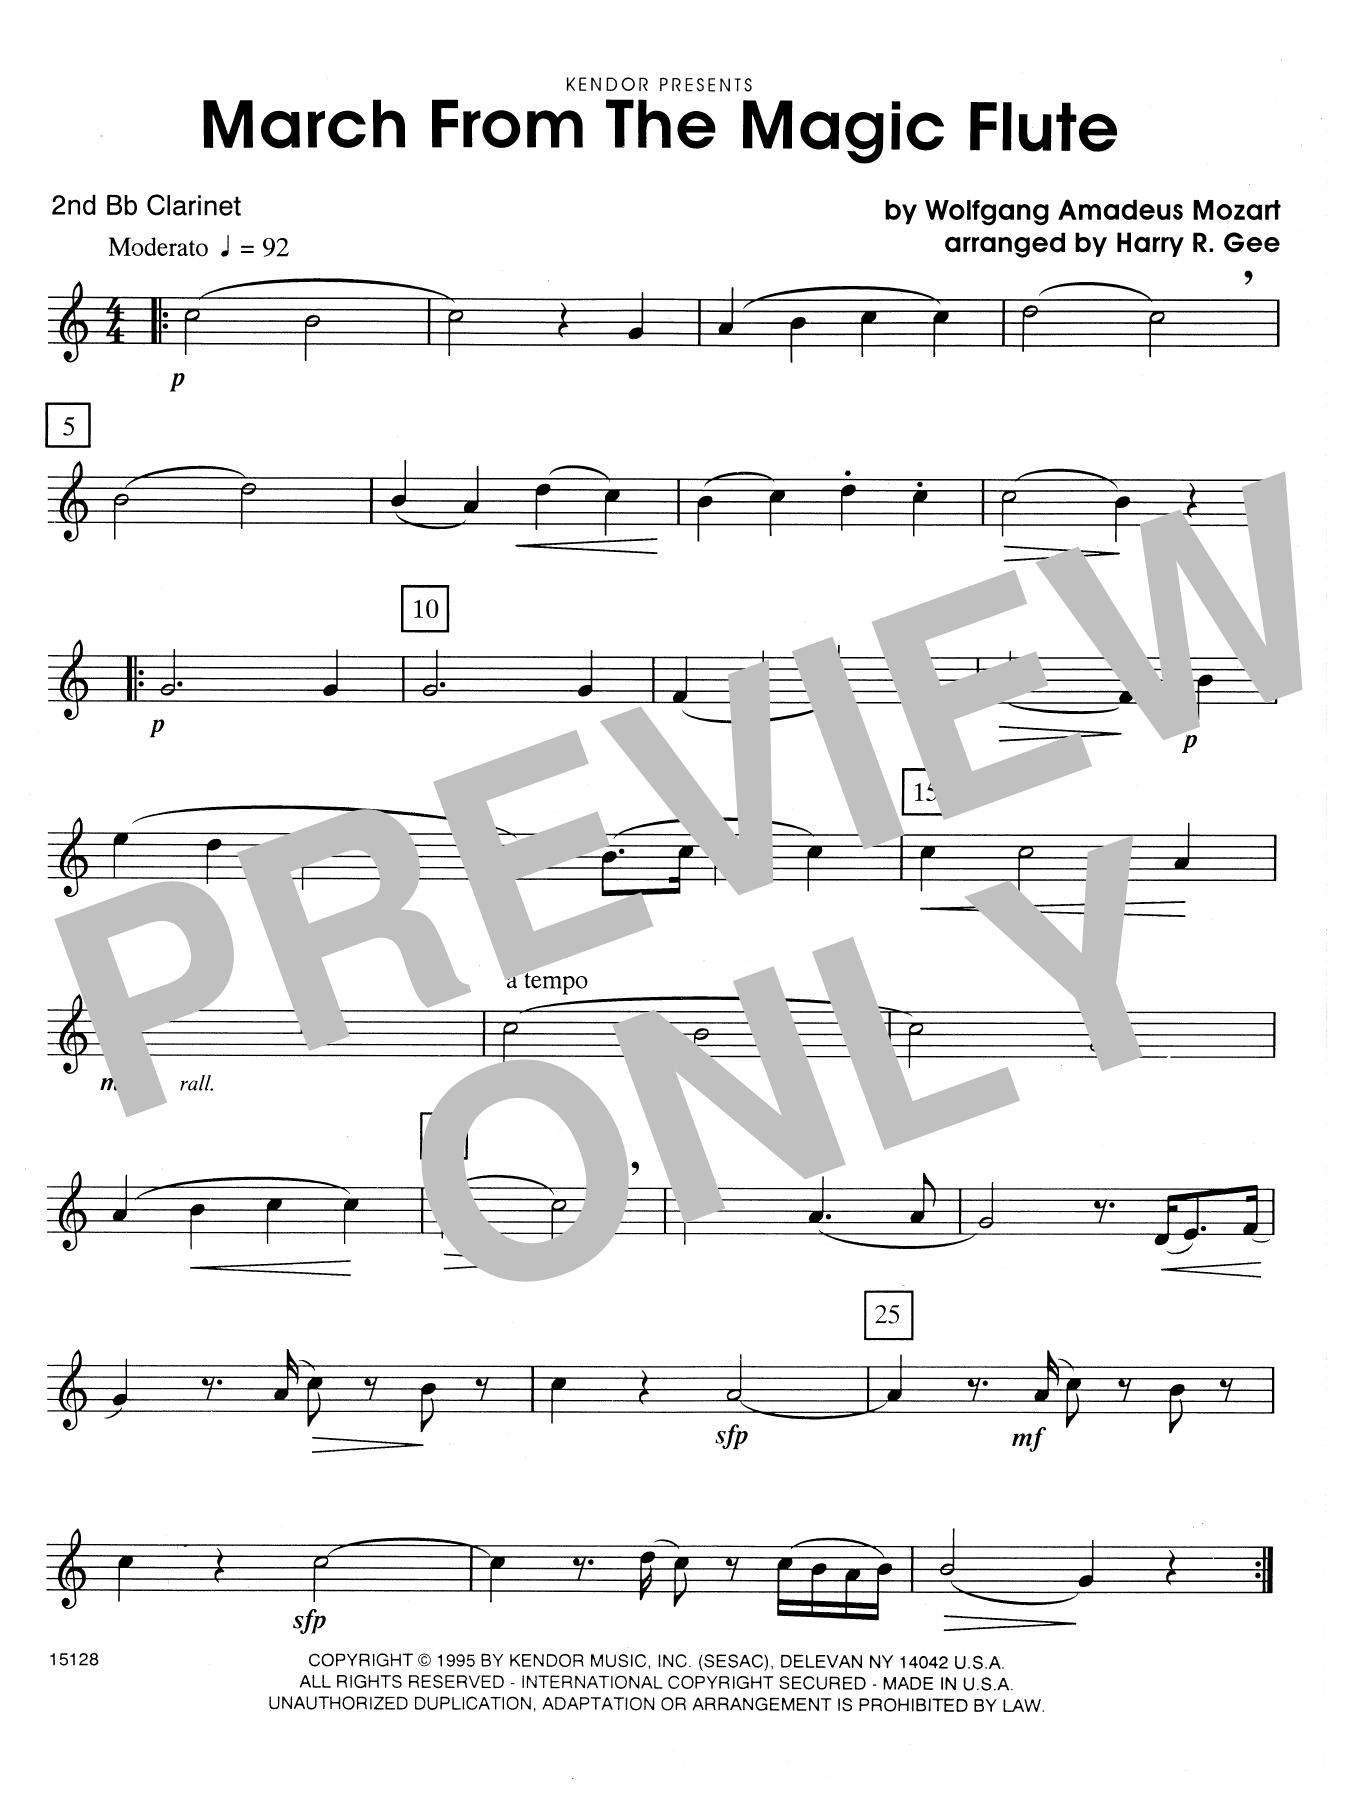 Download Harry R. Gee March From The Magic Flute - 2nd Bb Cla Sheet Music